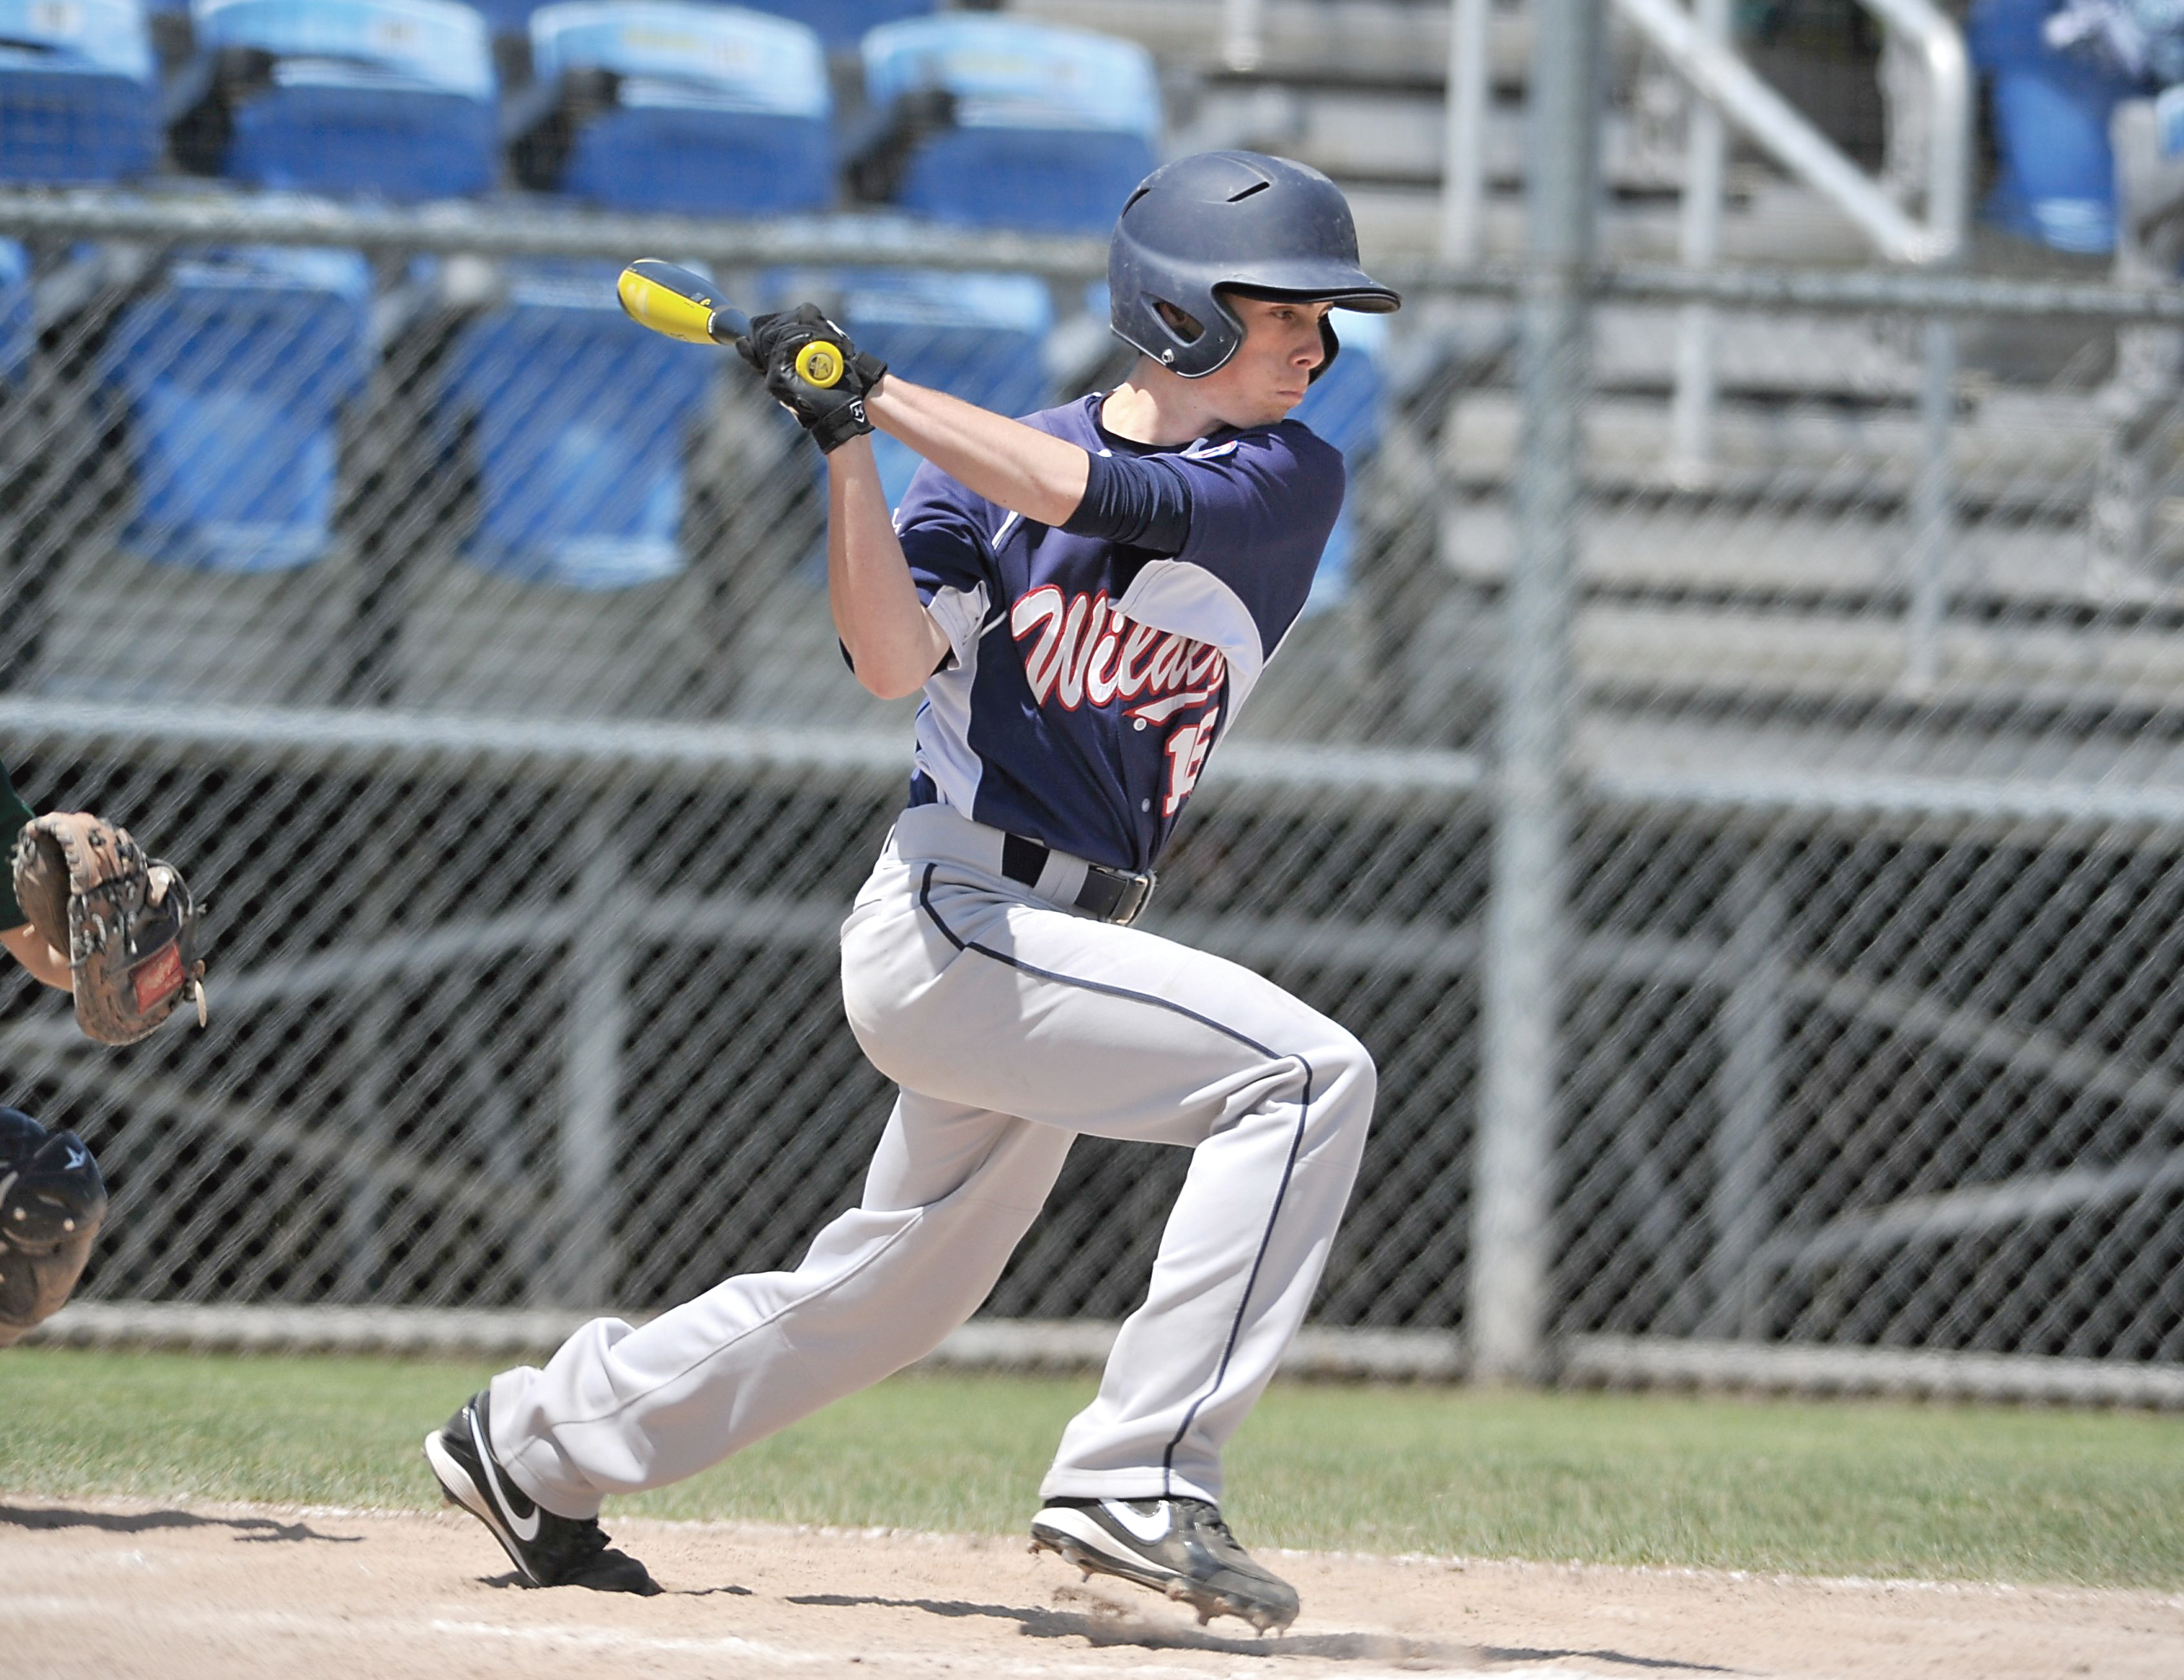 Wilder's James Grubb bats during the Global Sports Authority state tournament at the Kitsap County Fairgrounds last month. Jeff Halstead/for Peninsula Daily News